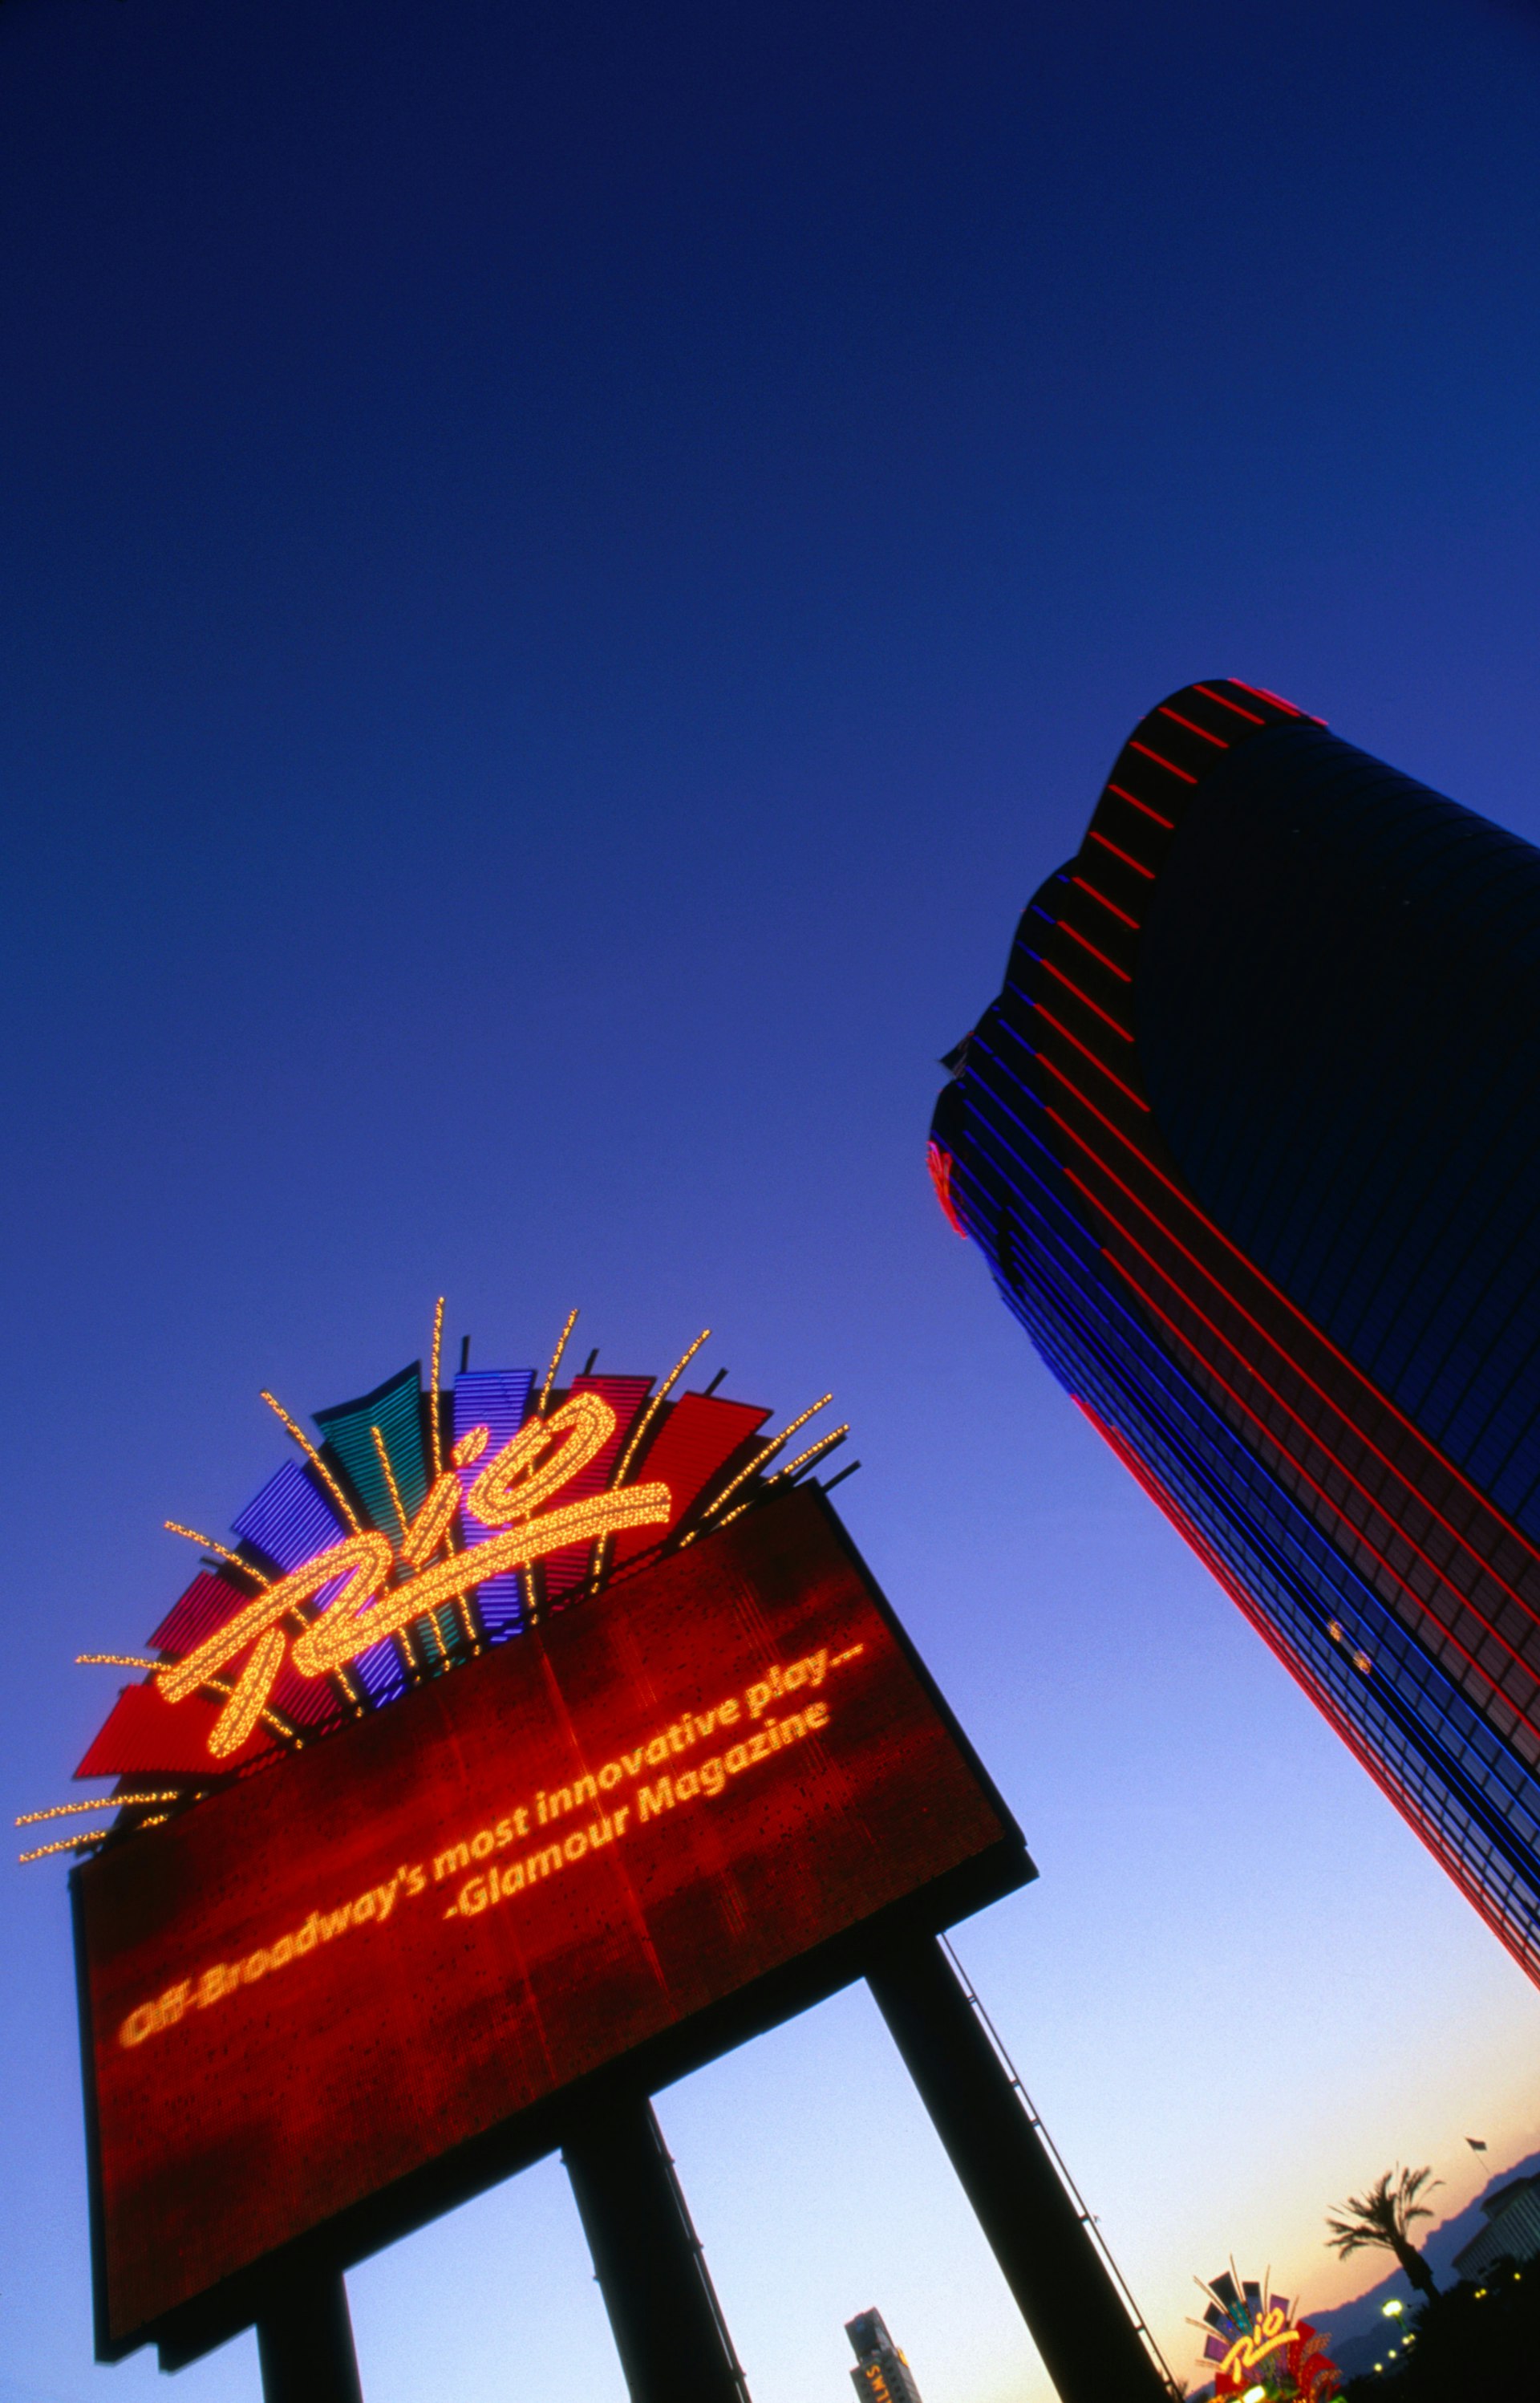 The sign of the Rio Hotel and Casino against the night sky in Las Vegas